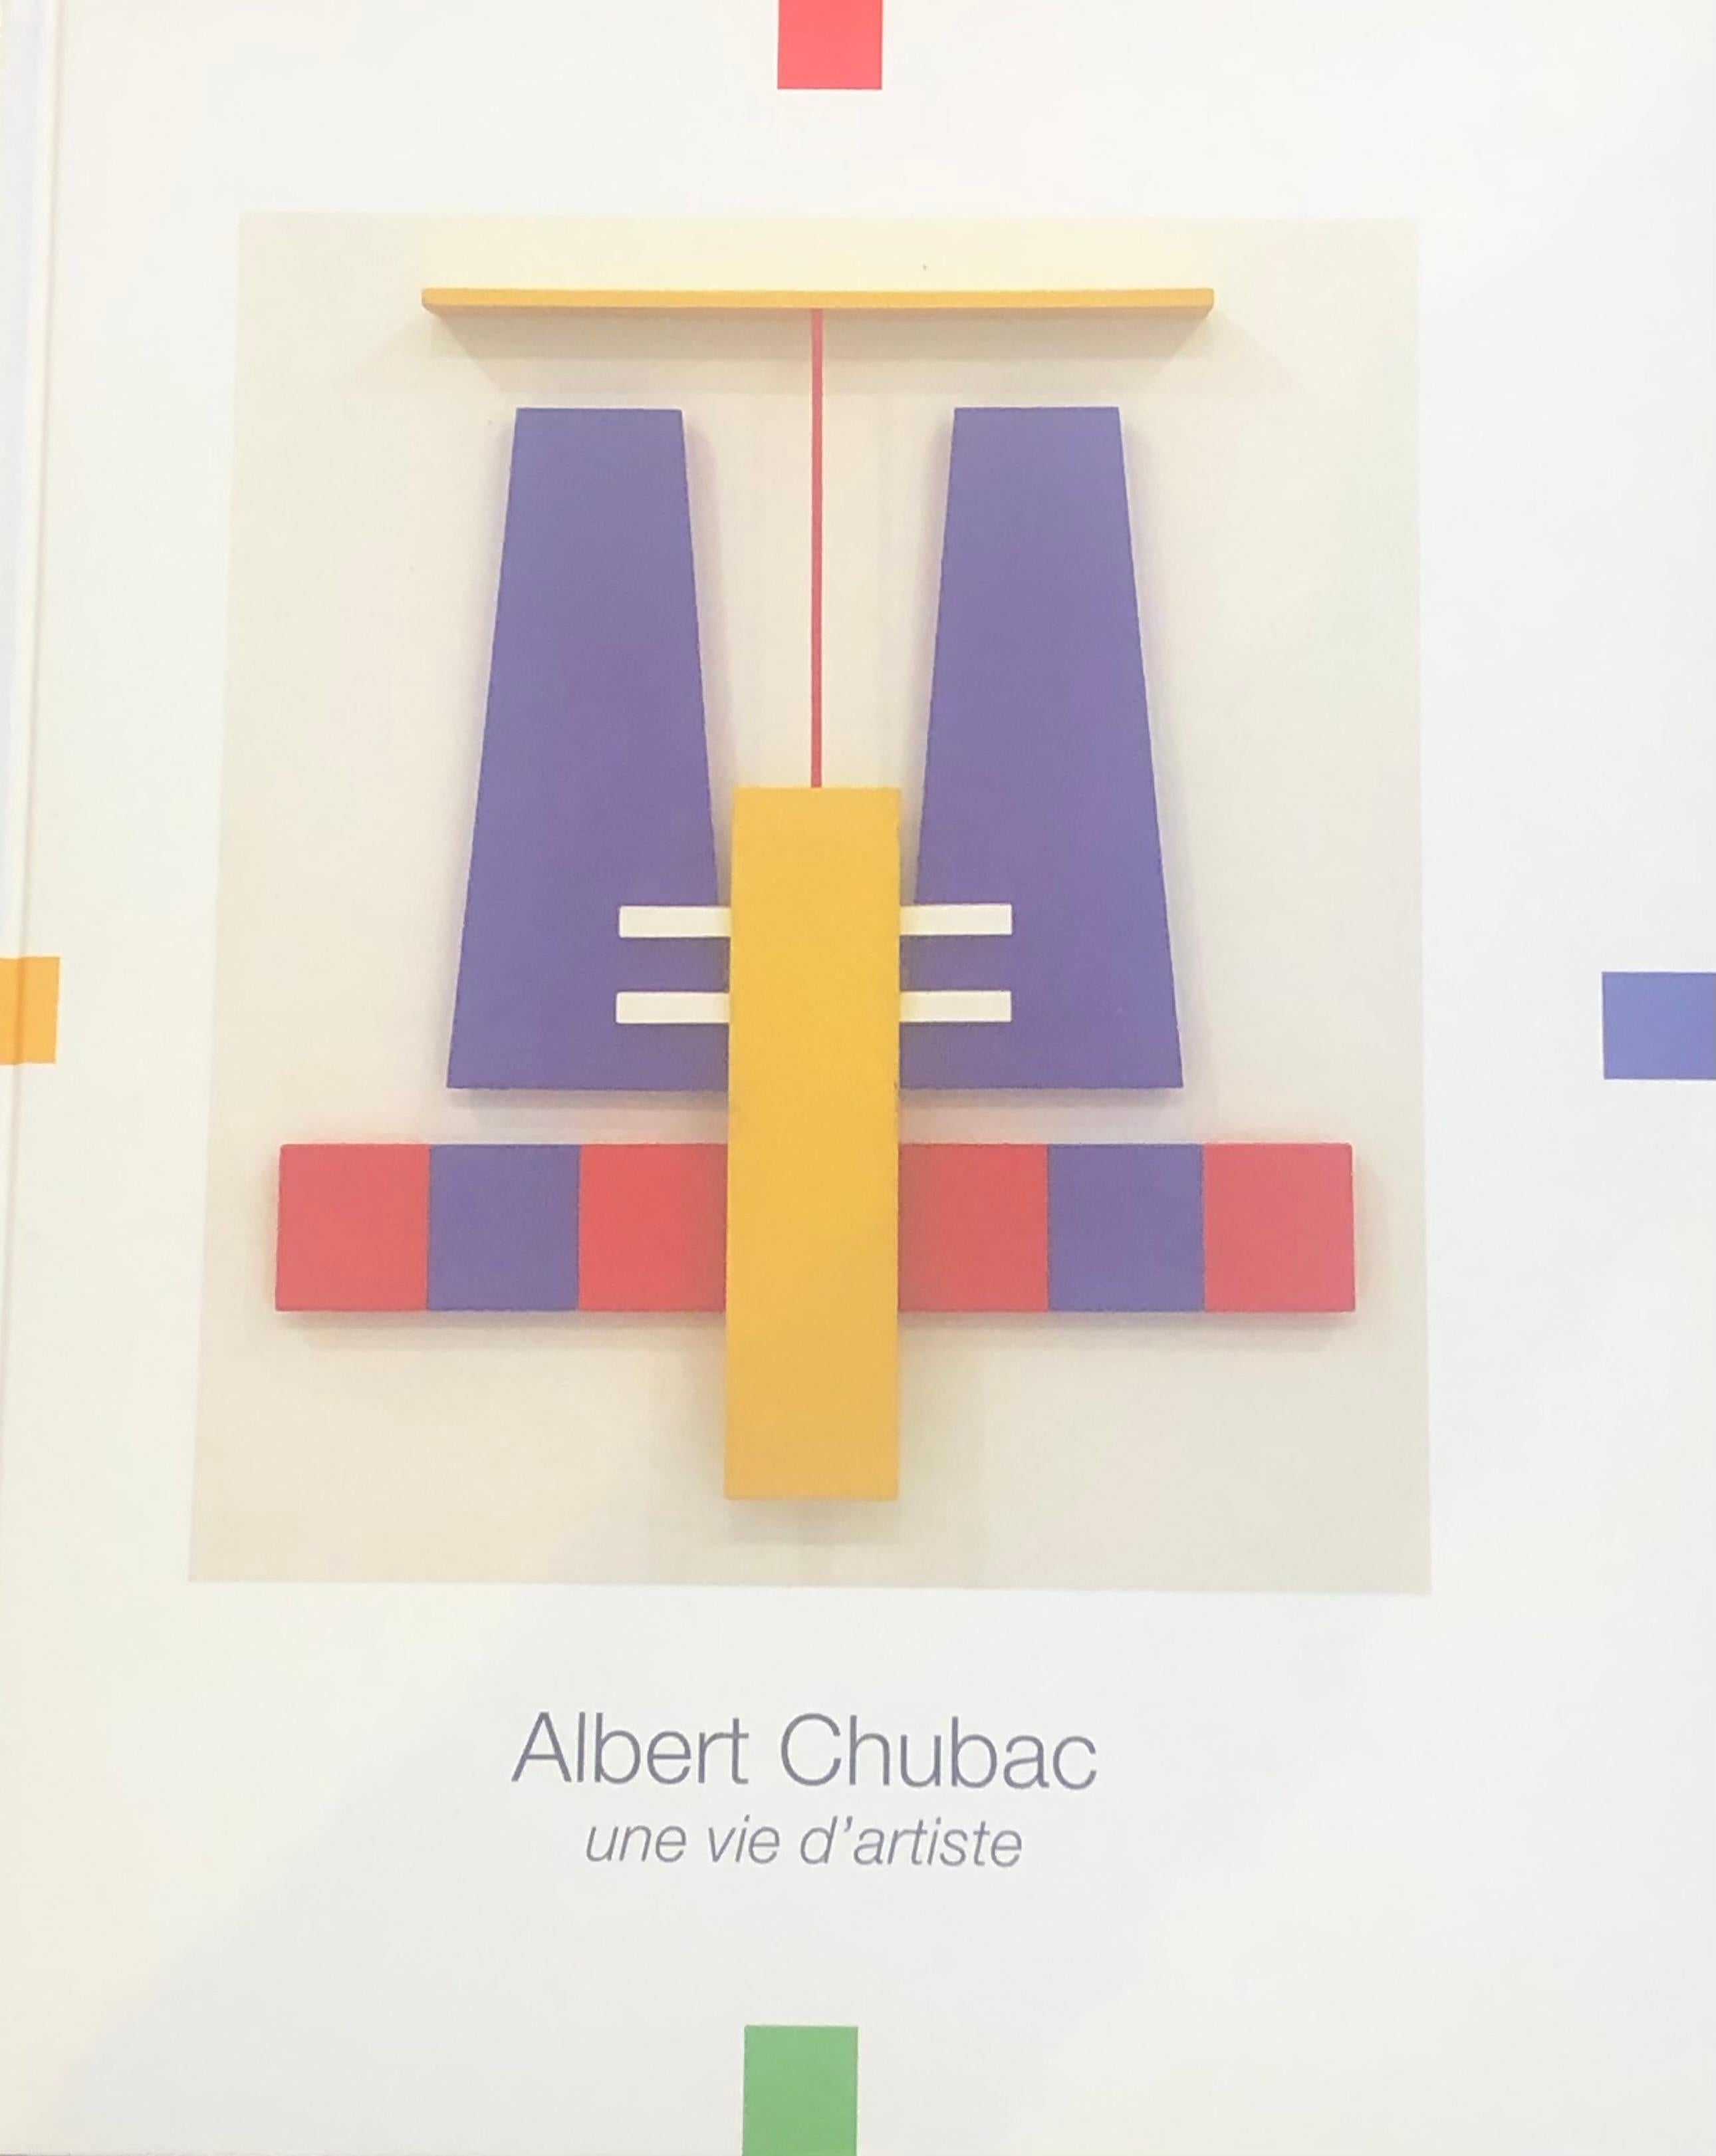 Chubac Albert, Large Painted Sculpture, Signed, Dated and Numbered For Sale 3